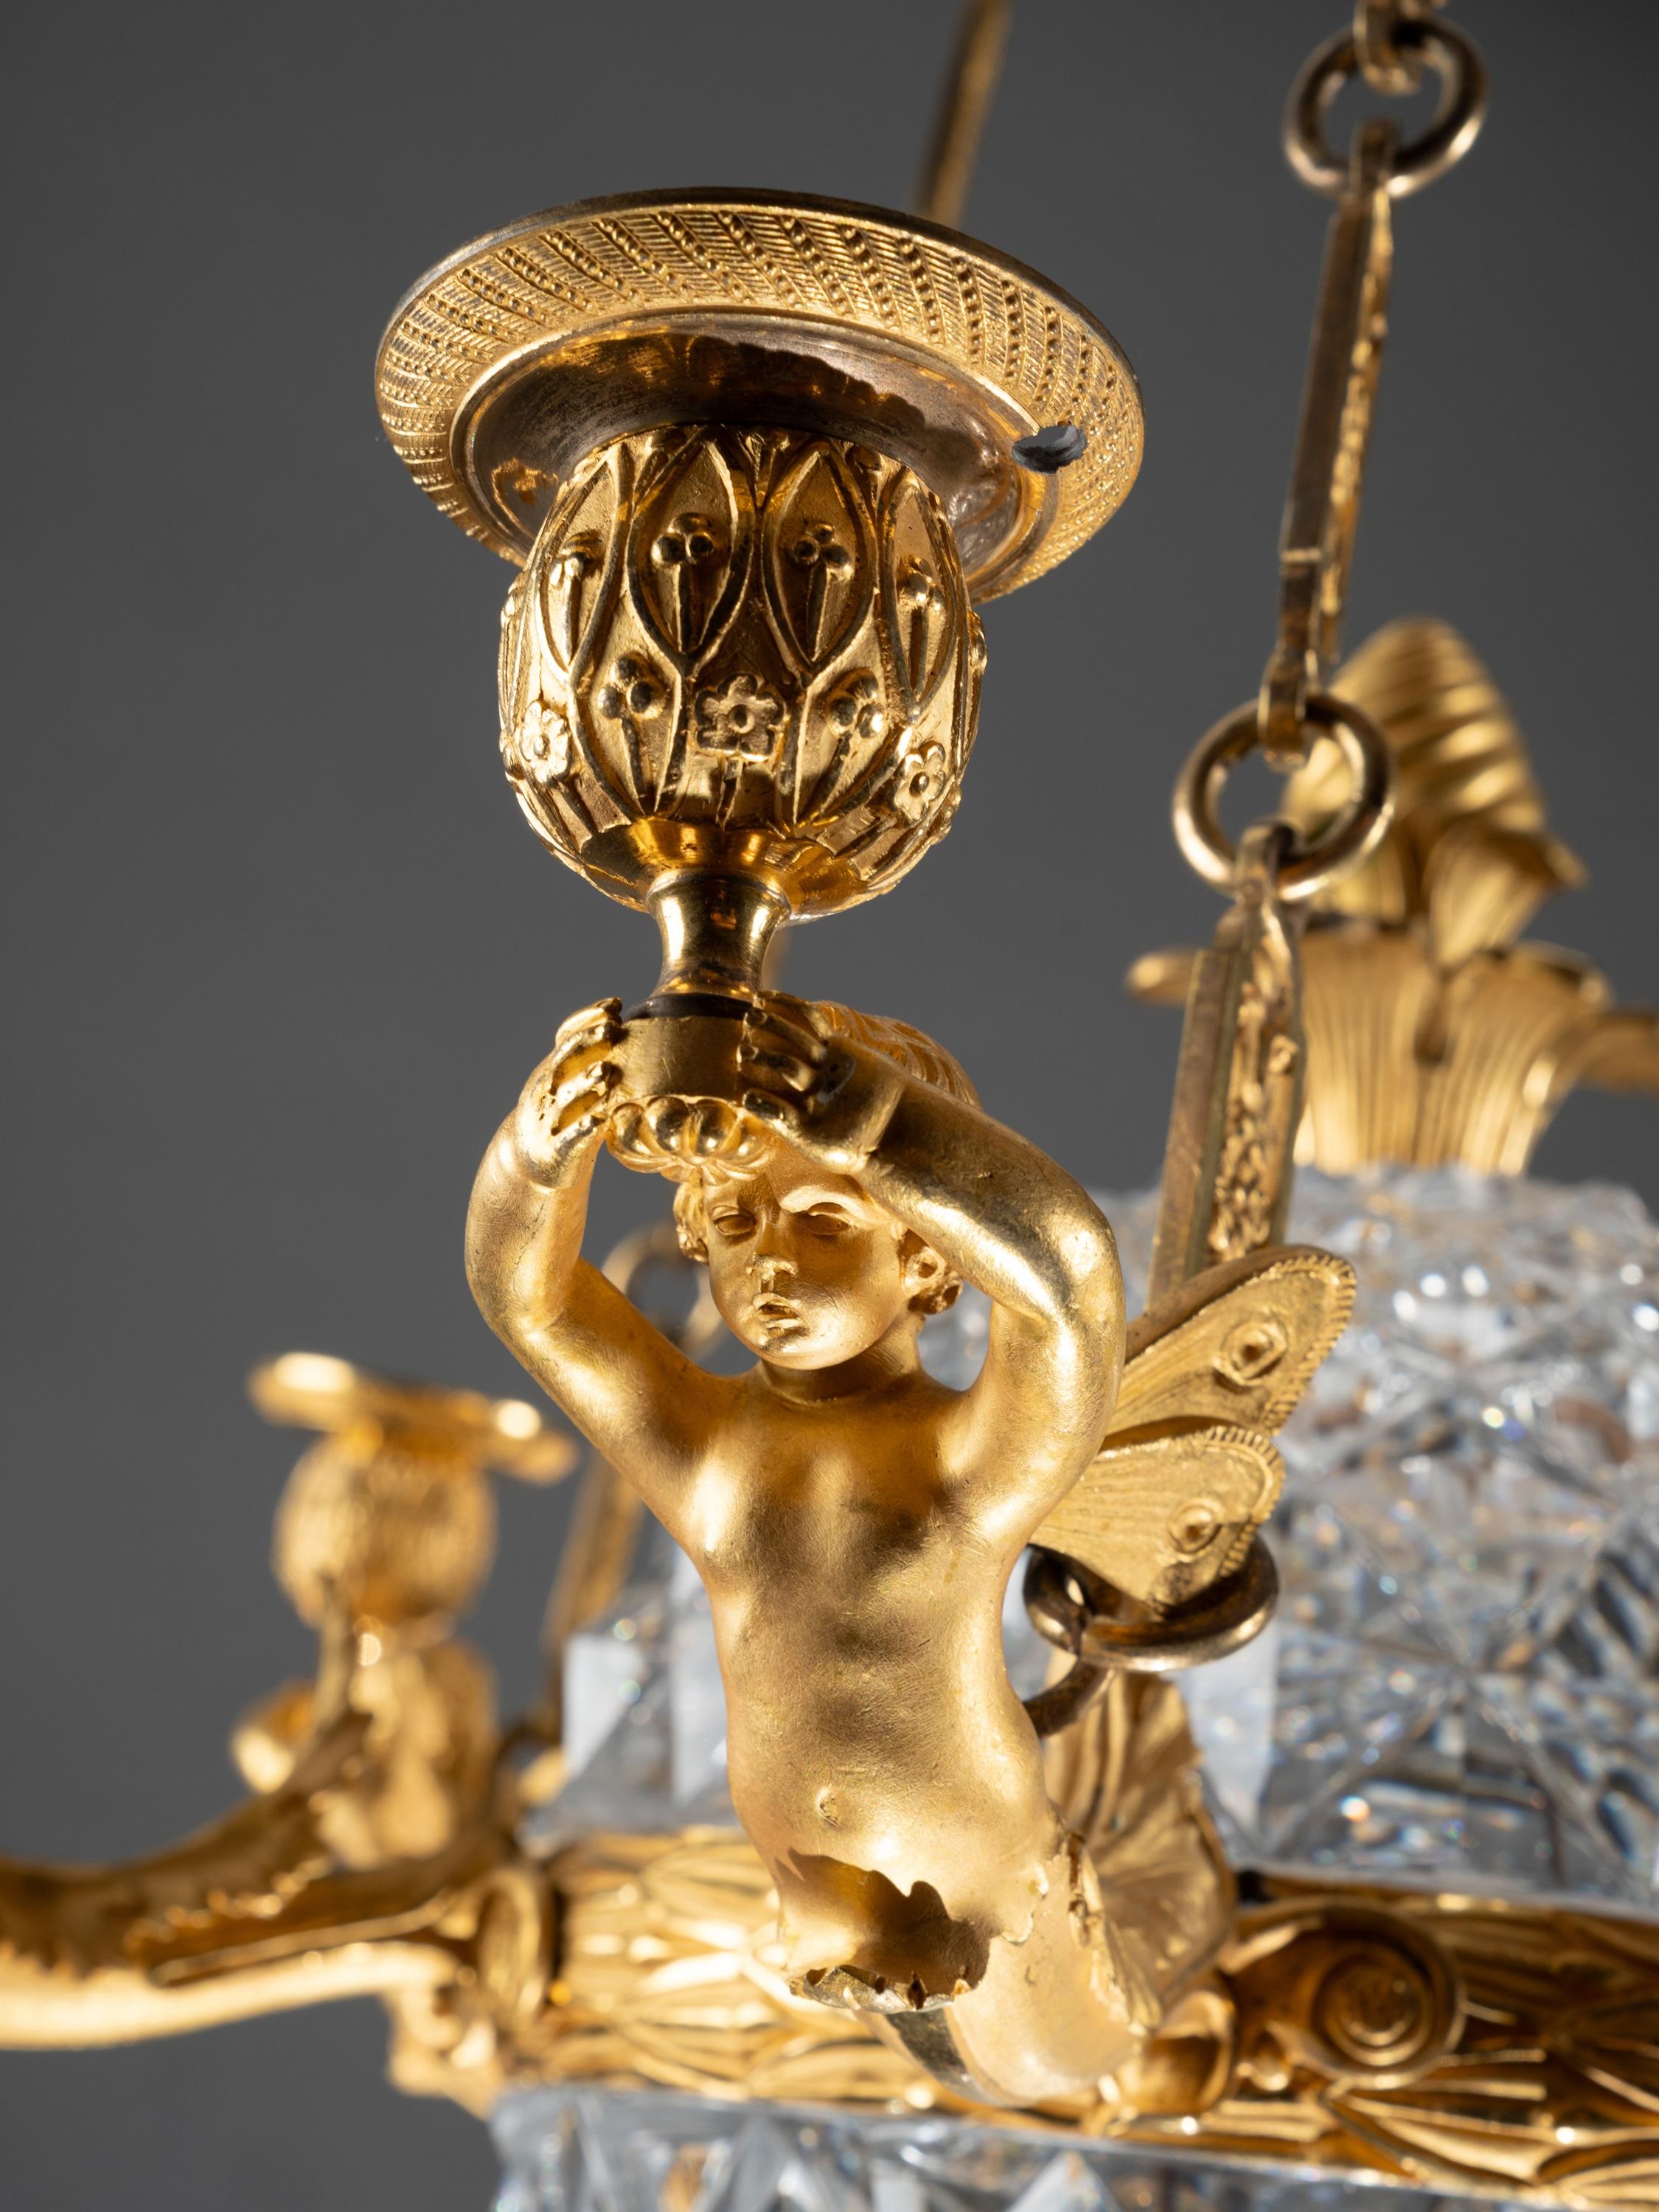 19th Century An Empire c. 1810 gilt bronze and crystal chandelier attributed to Ravrio, Paris